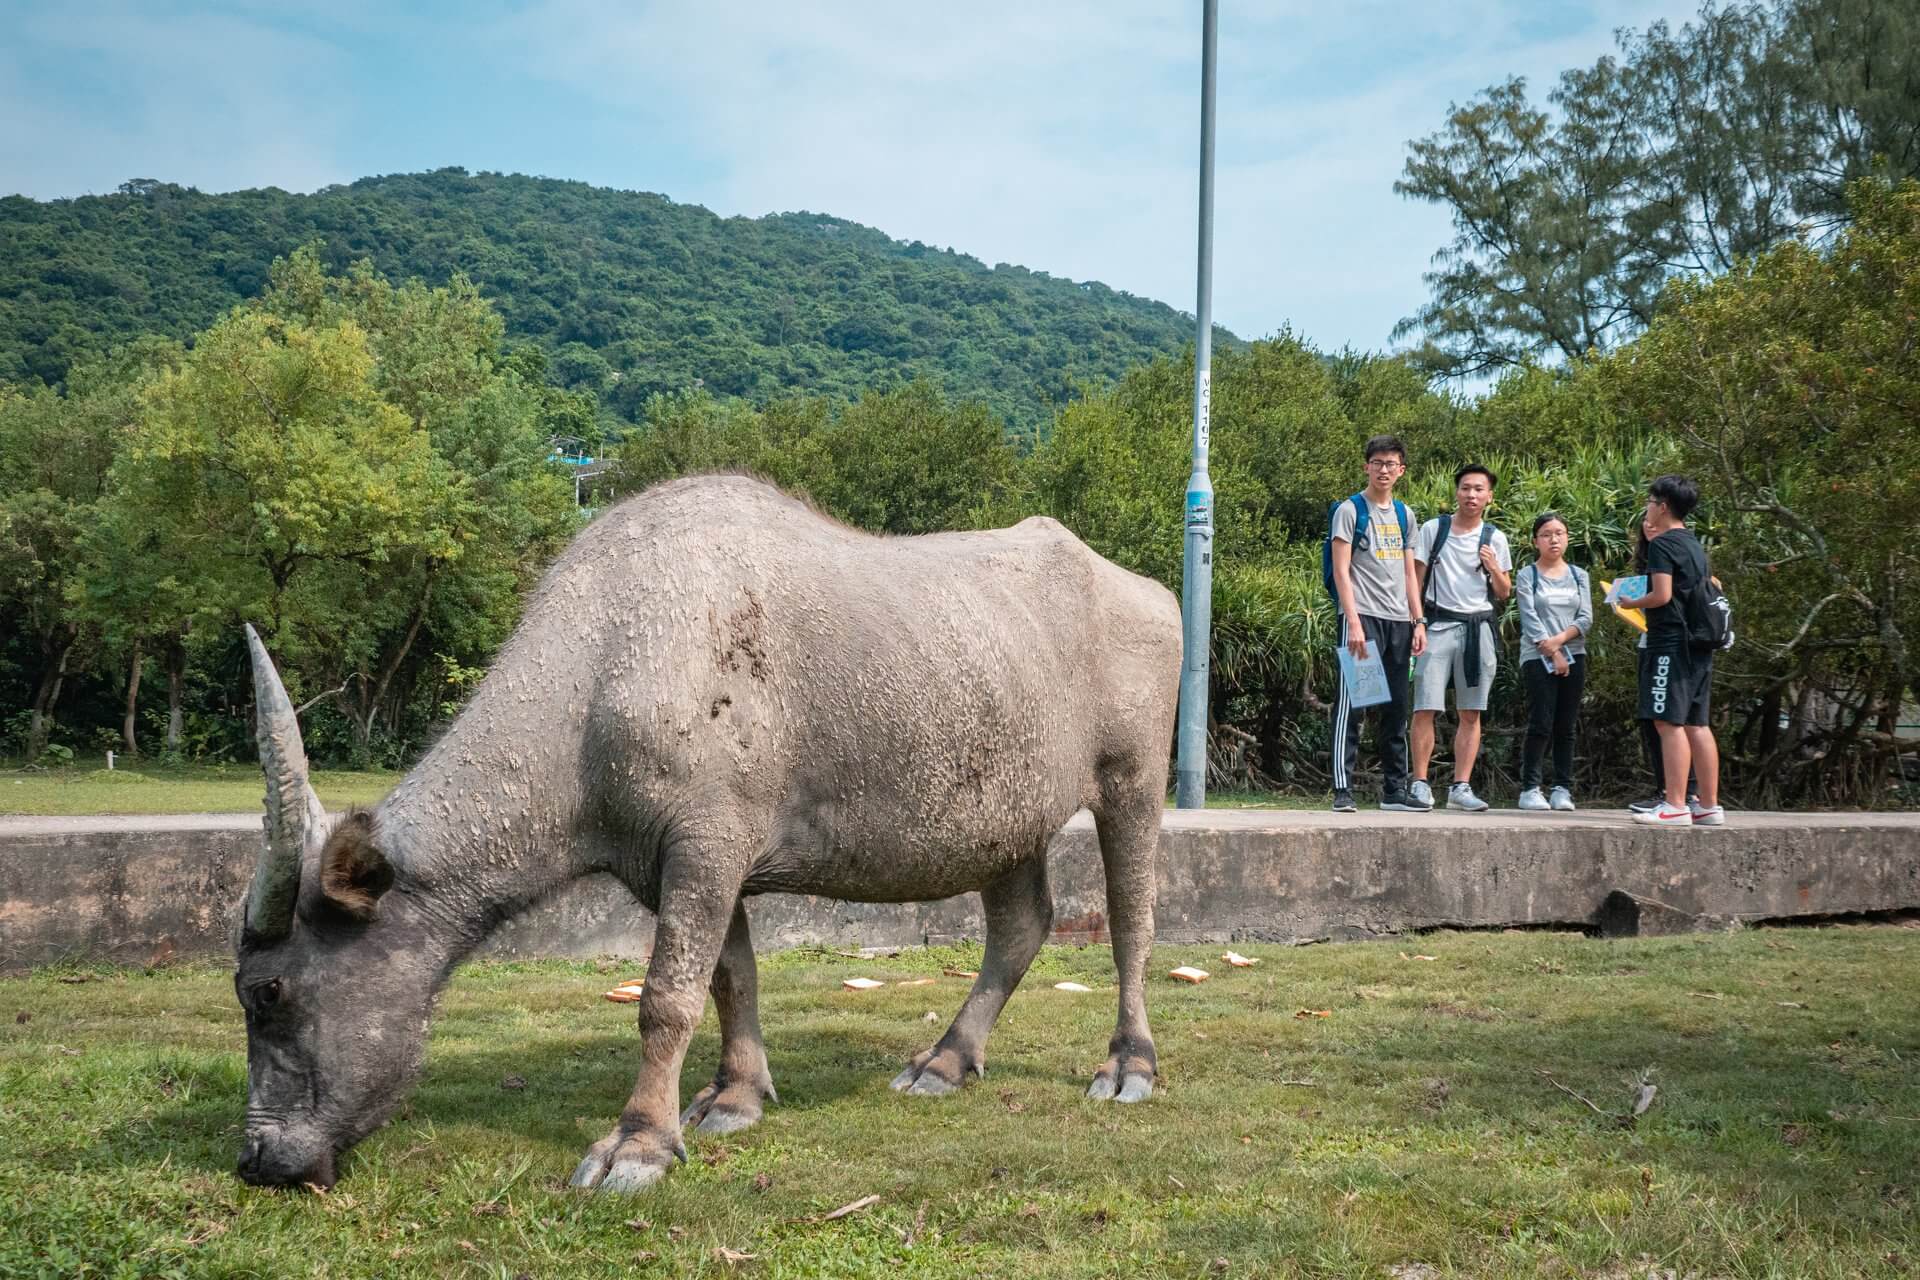 "A Day in Shui Hau" : Is there any hint from the hungry water buffalo?